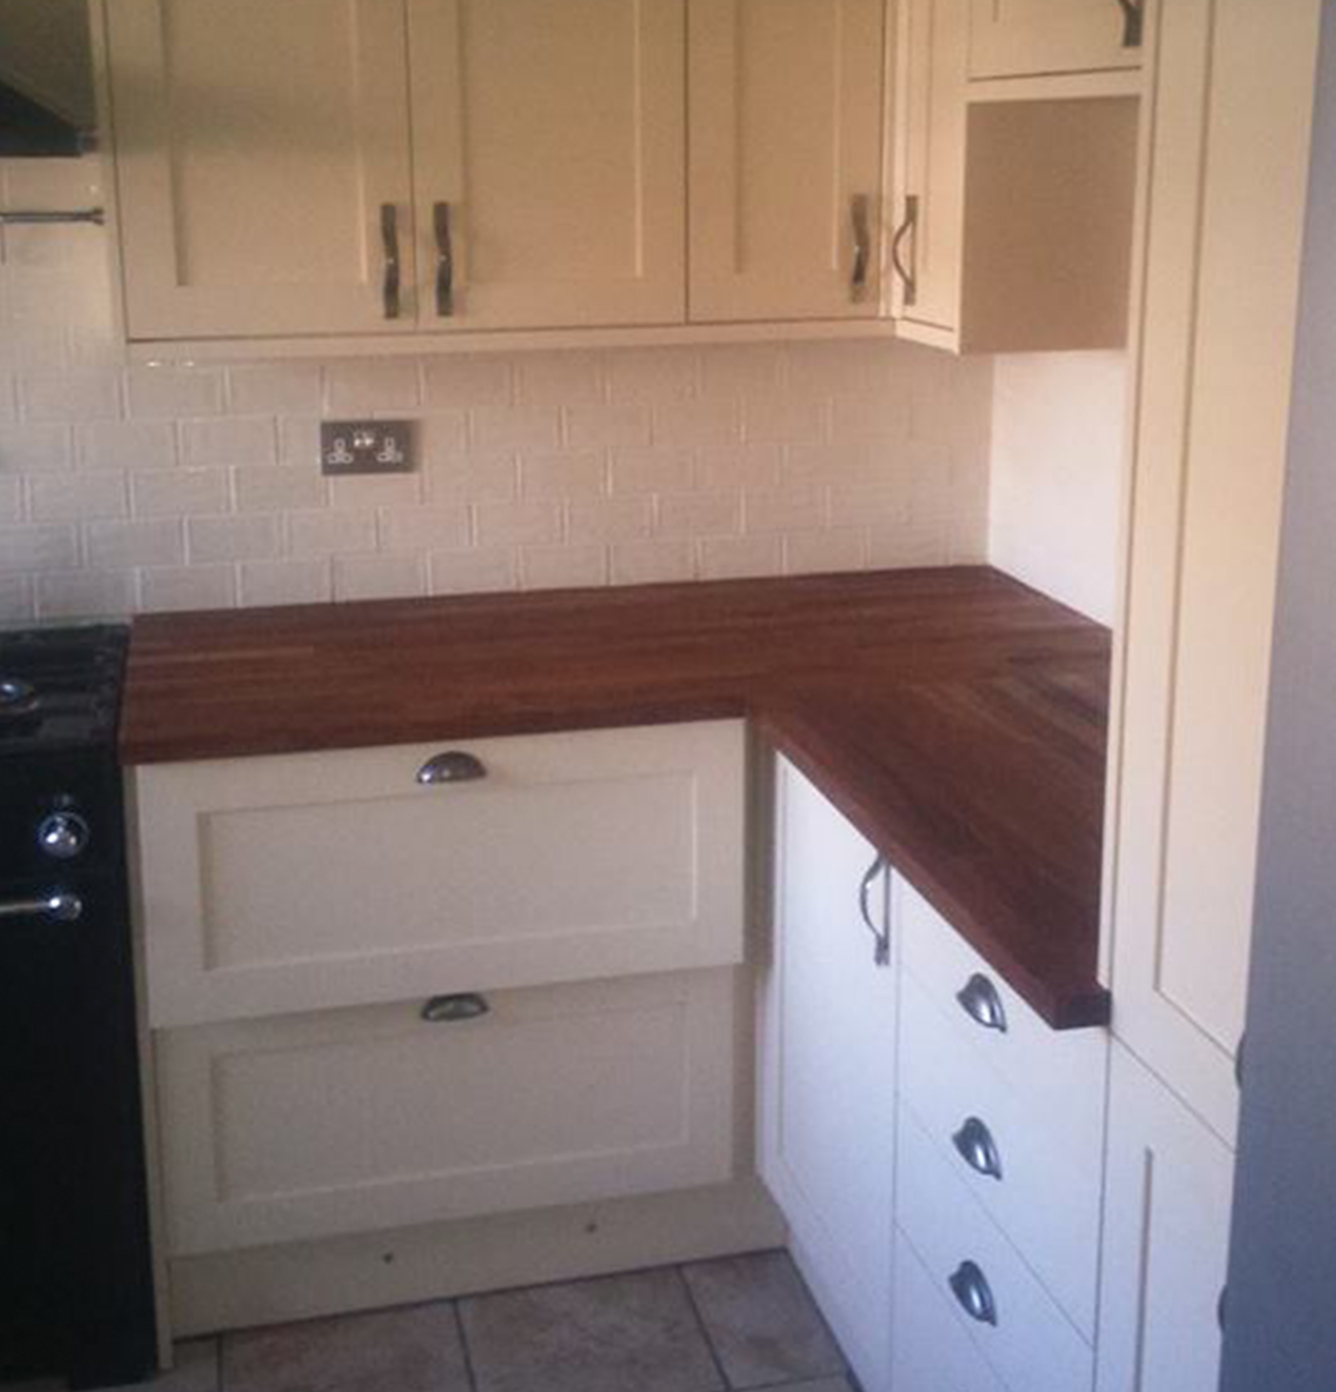 Bathroom and Kitchen Installations in St Albans